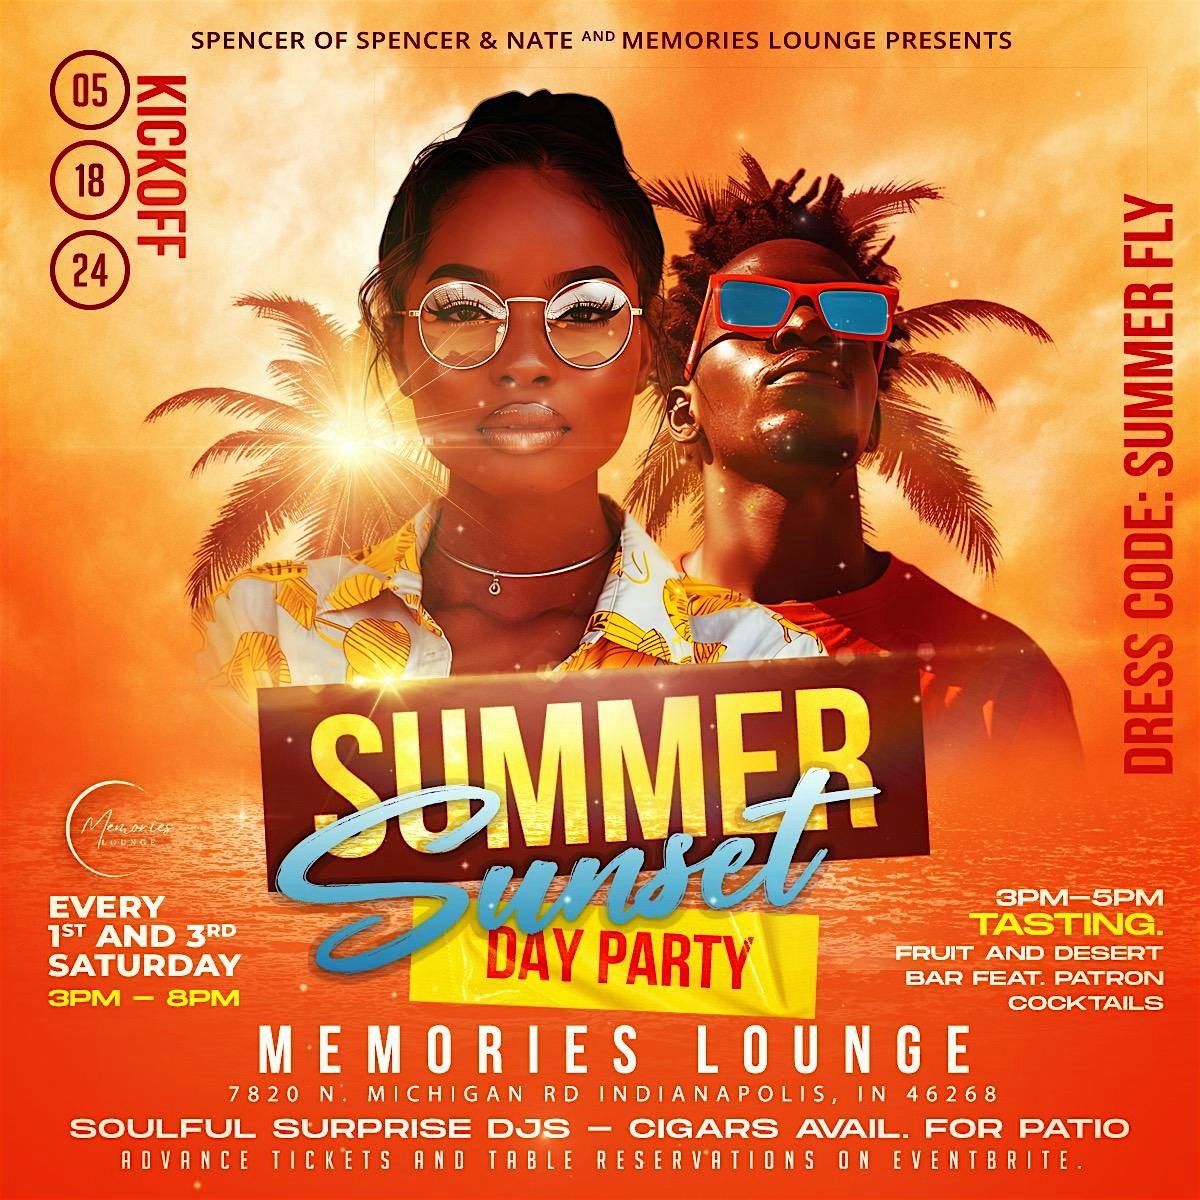 Summer Sunset Day Party. At Memories Lounge